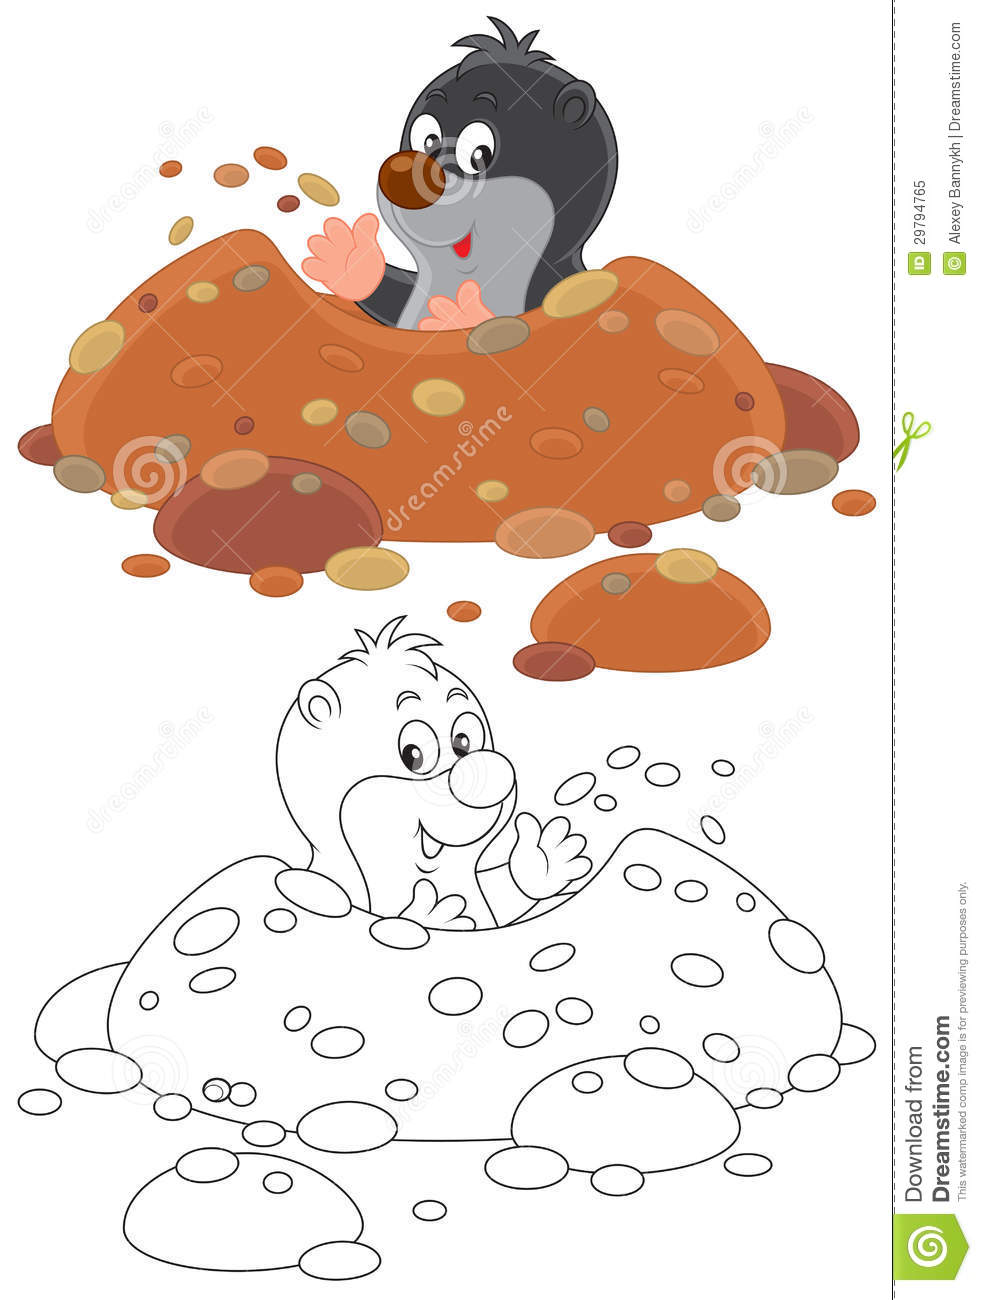 Little Mole Digging A Hole Vector Clip Art On A White Background